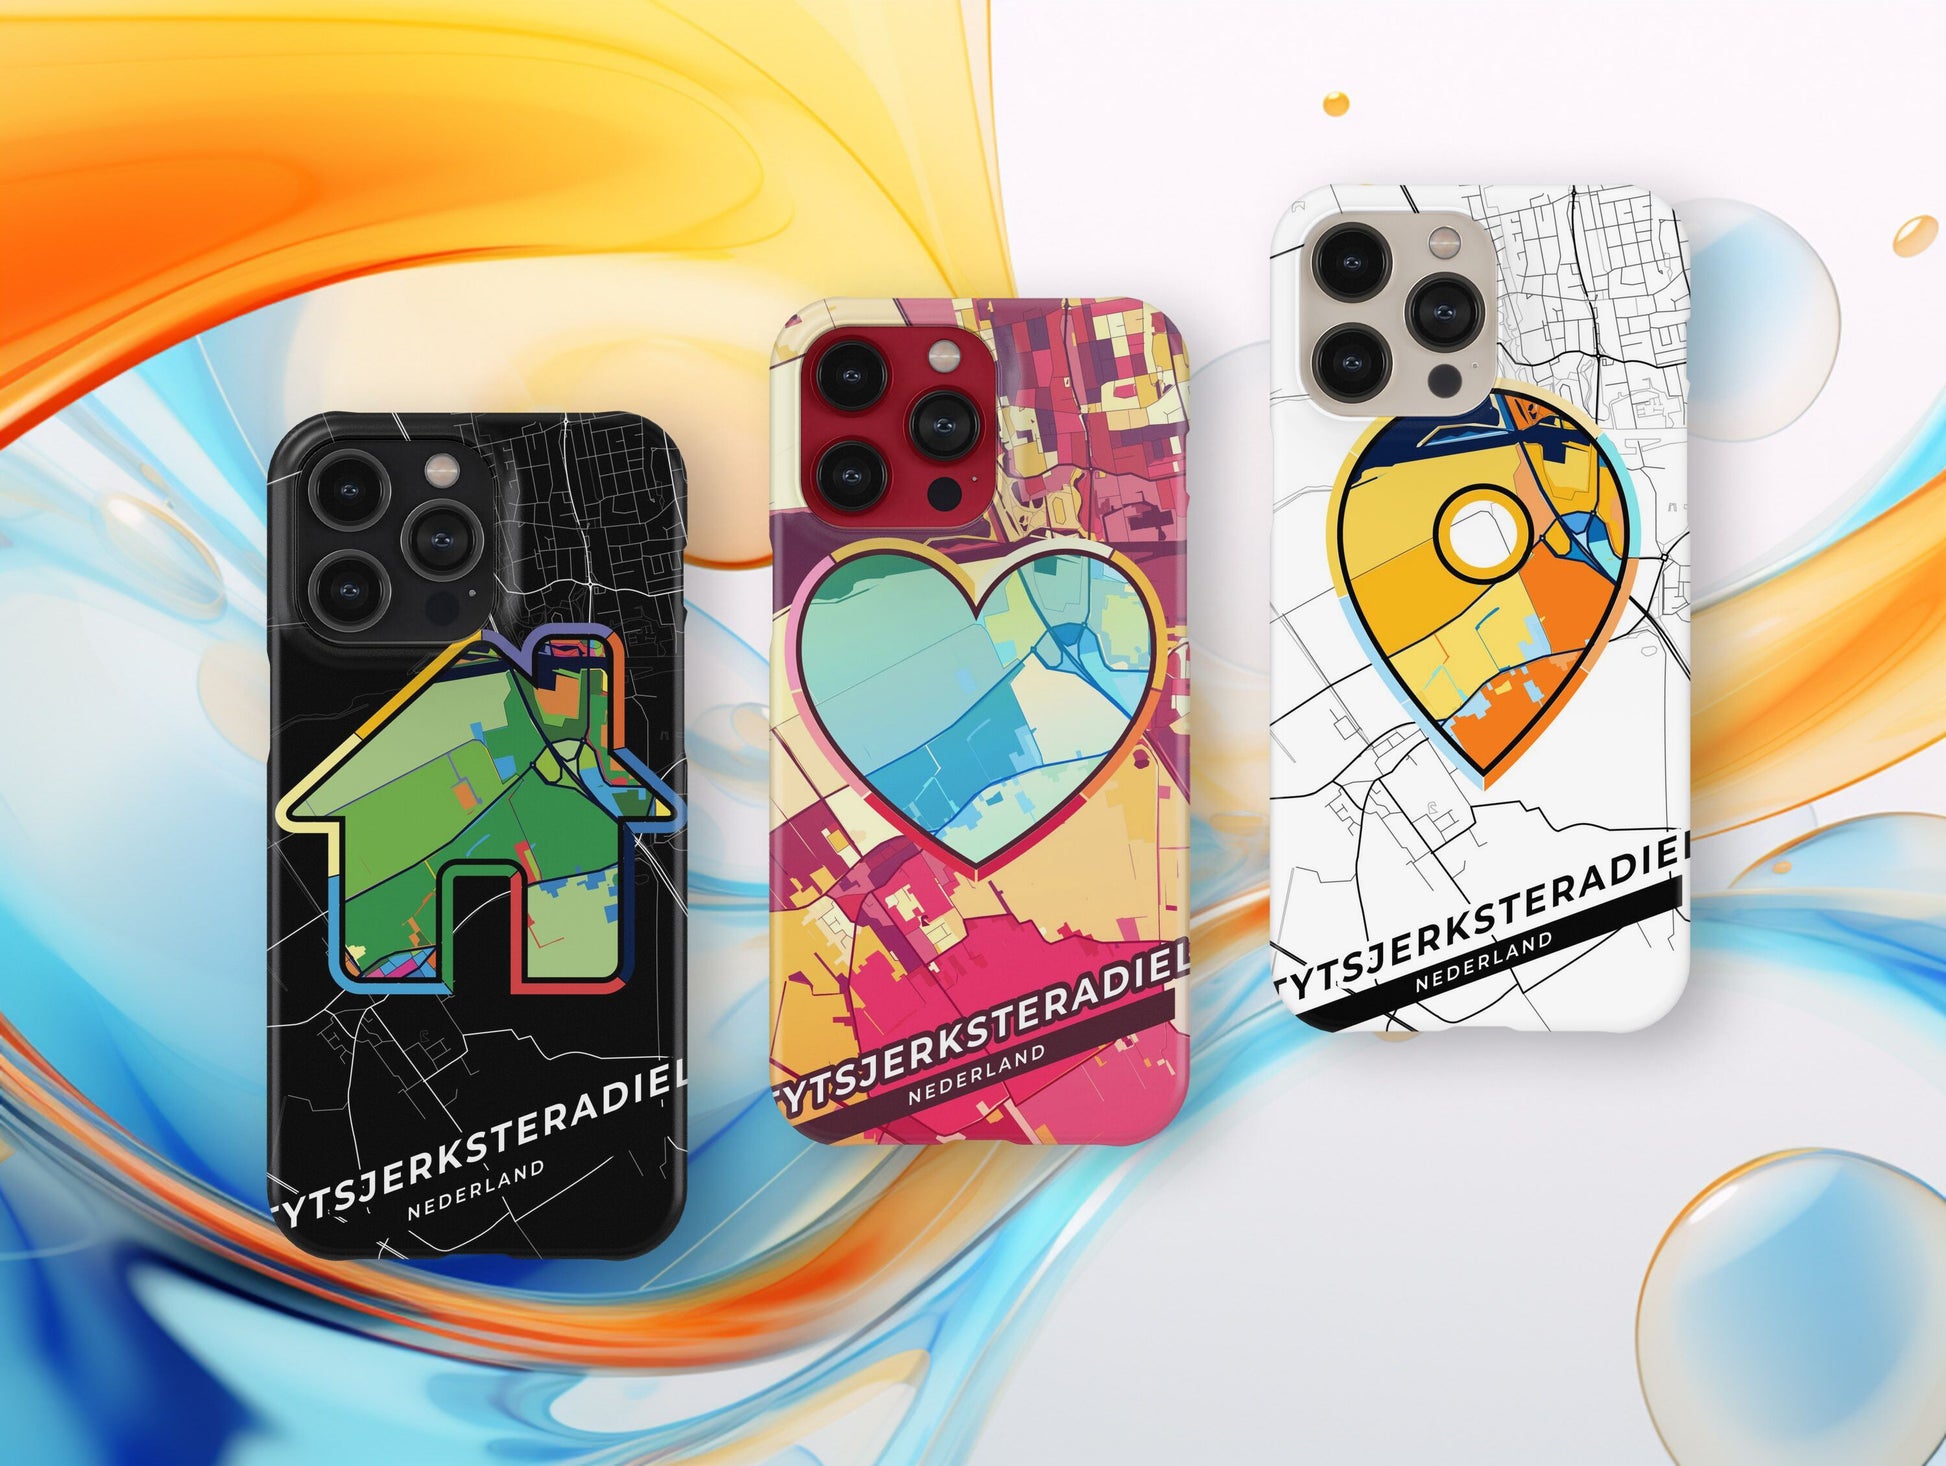 Tytsjerksteradiel Netherlands slim phone case with colorful icon